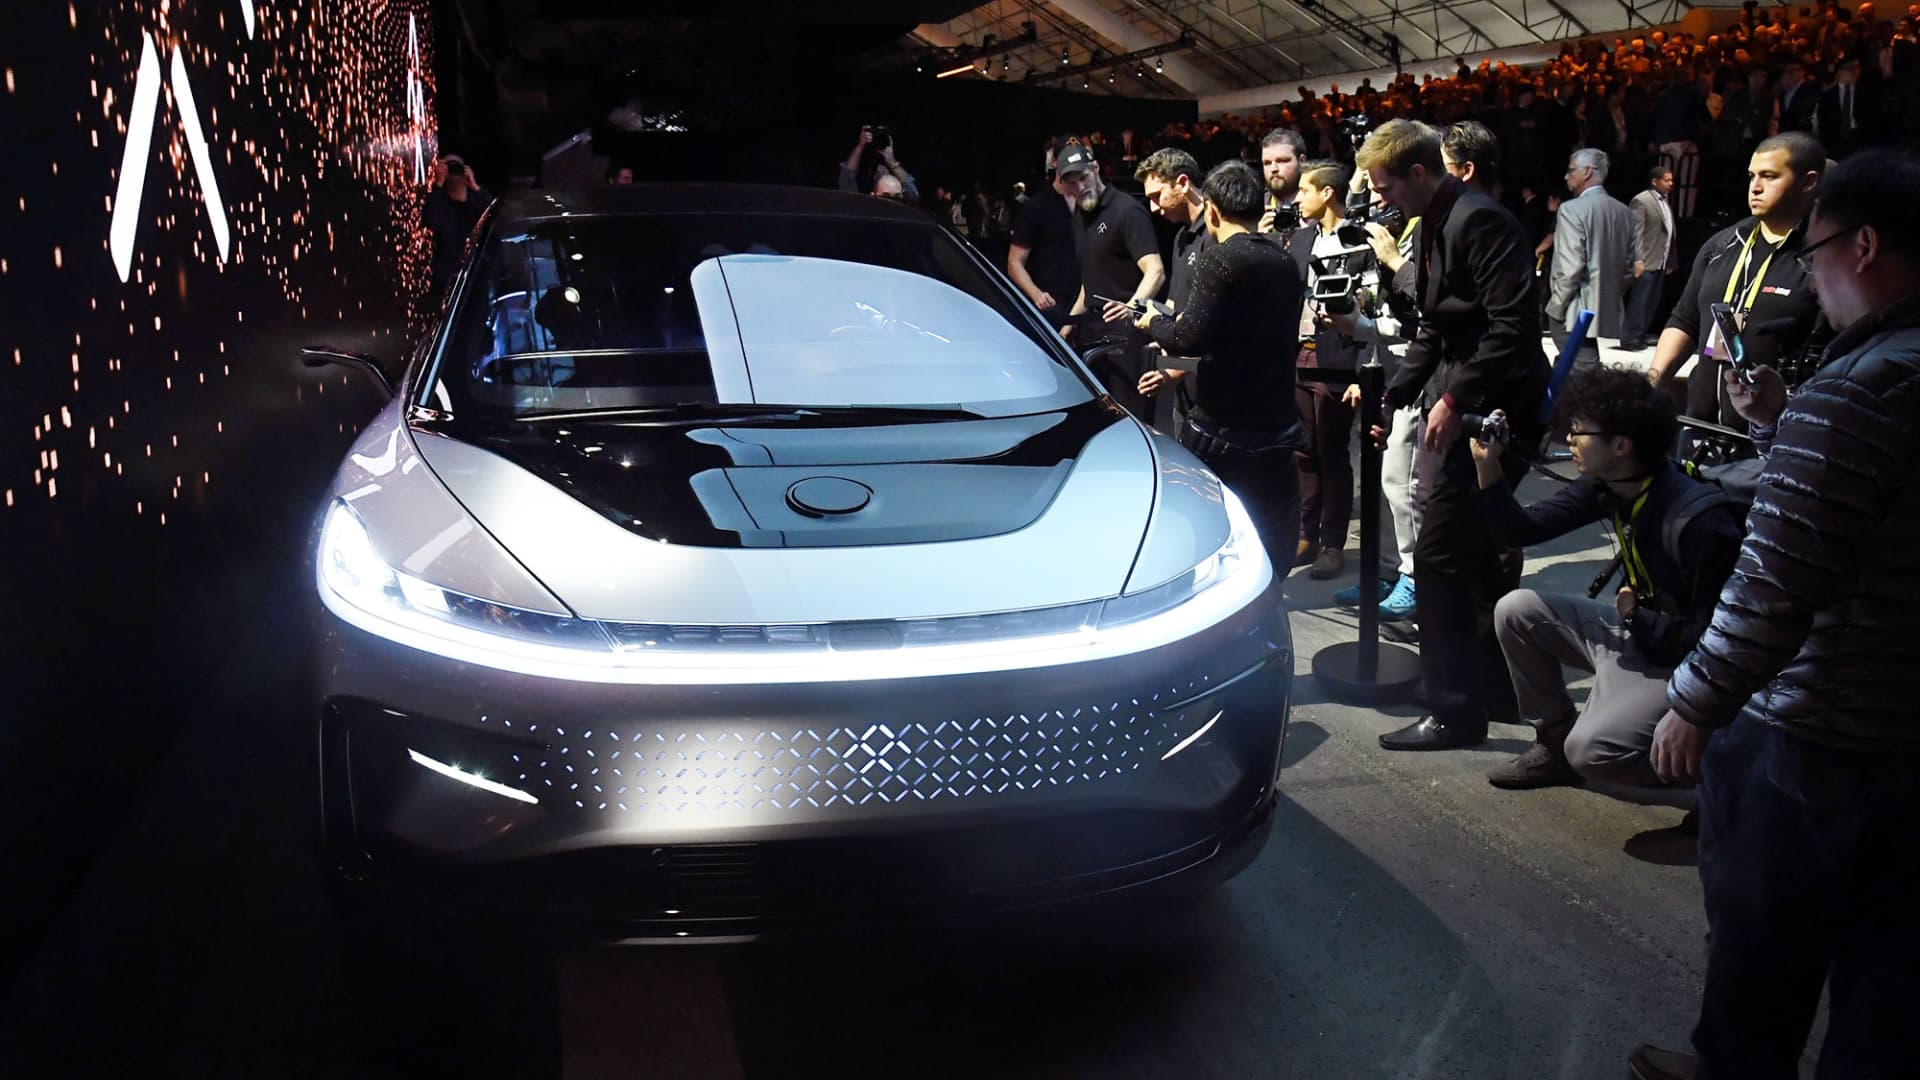 Attendees look at Faraday Future's FF 91 prototype electric crossover vehicle after it was unveiled at CES 2017 on January 3, 2017, in Las Vegas.